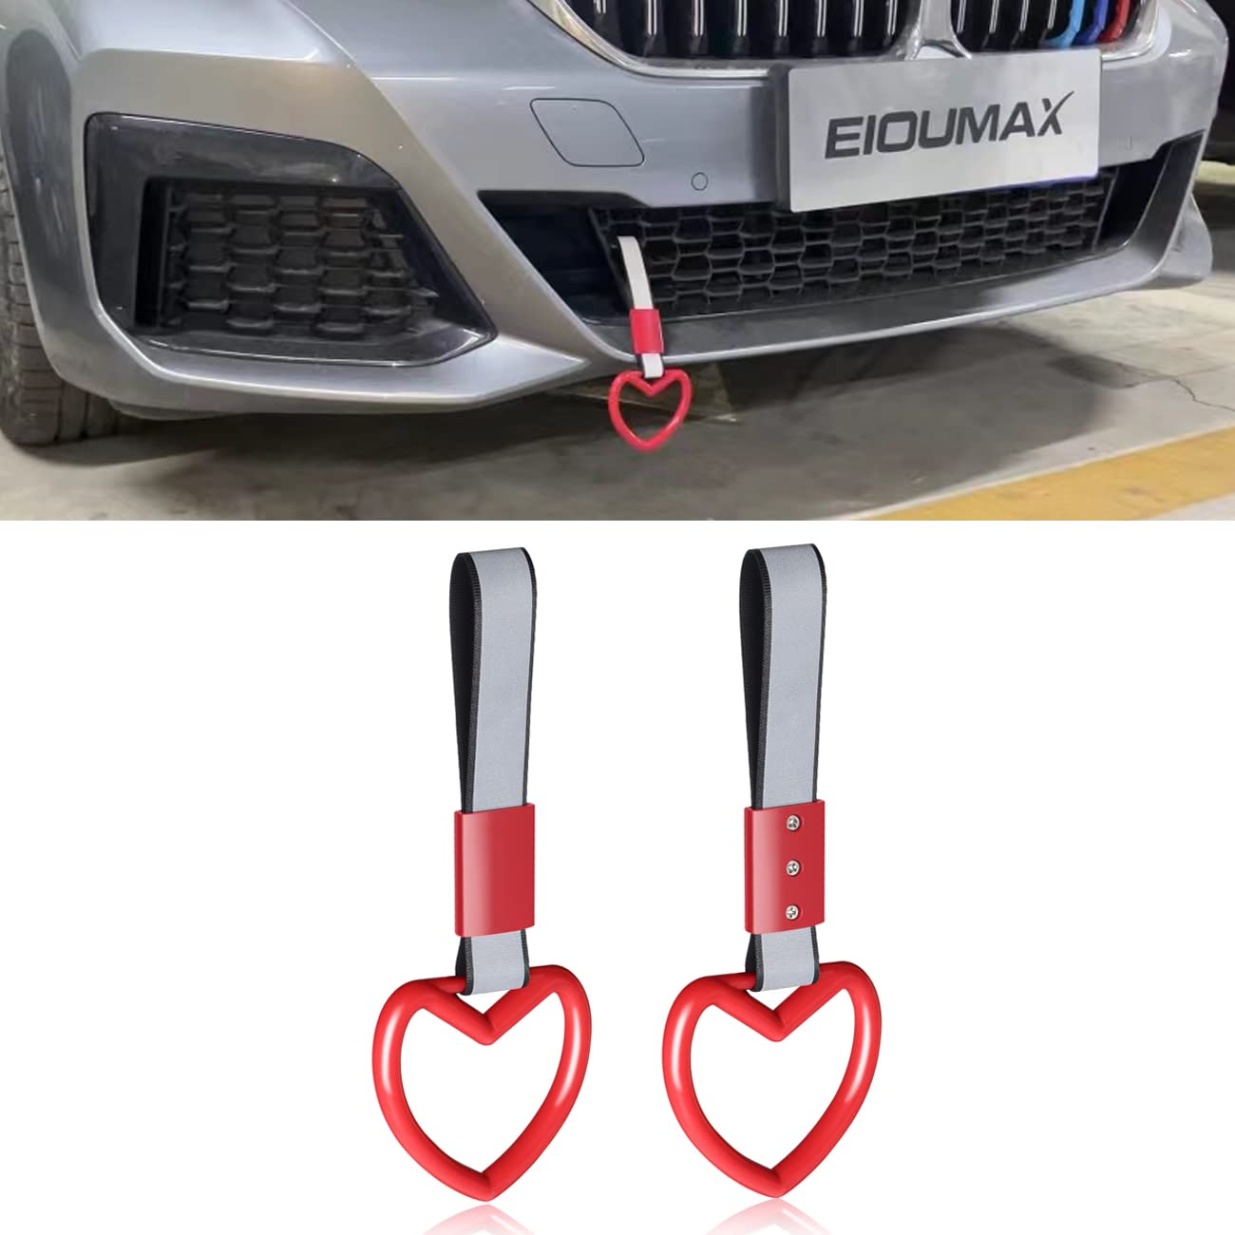 exterior car accessories Niche Utama Home EIOUMAX JDM car Accessories,Heart Reflective Shaped Car Handle Straps,Rear  Bumper Warning Rings Exterior Decoration-pcs(Red)